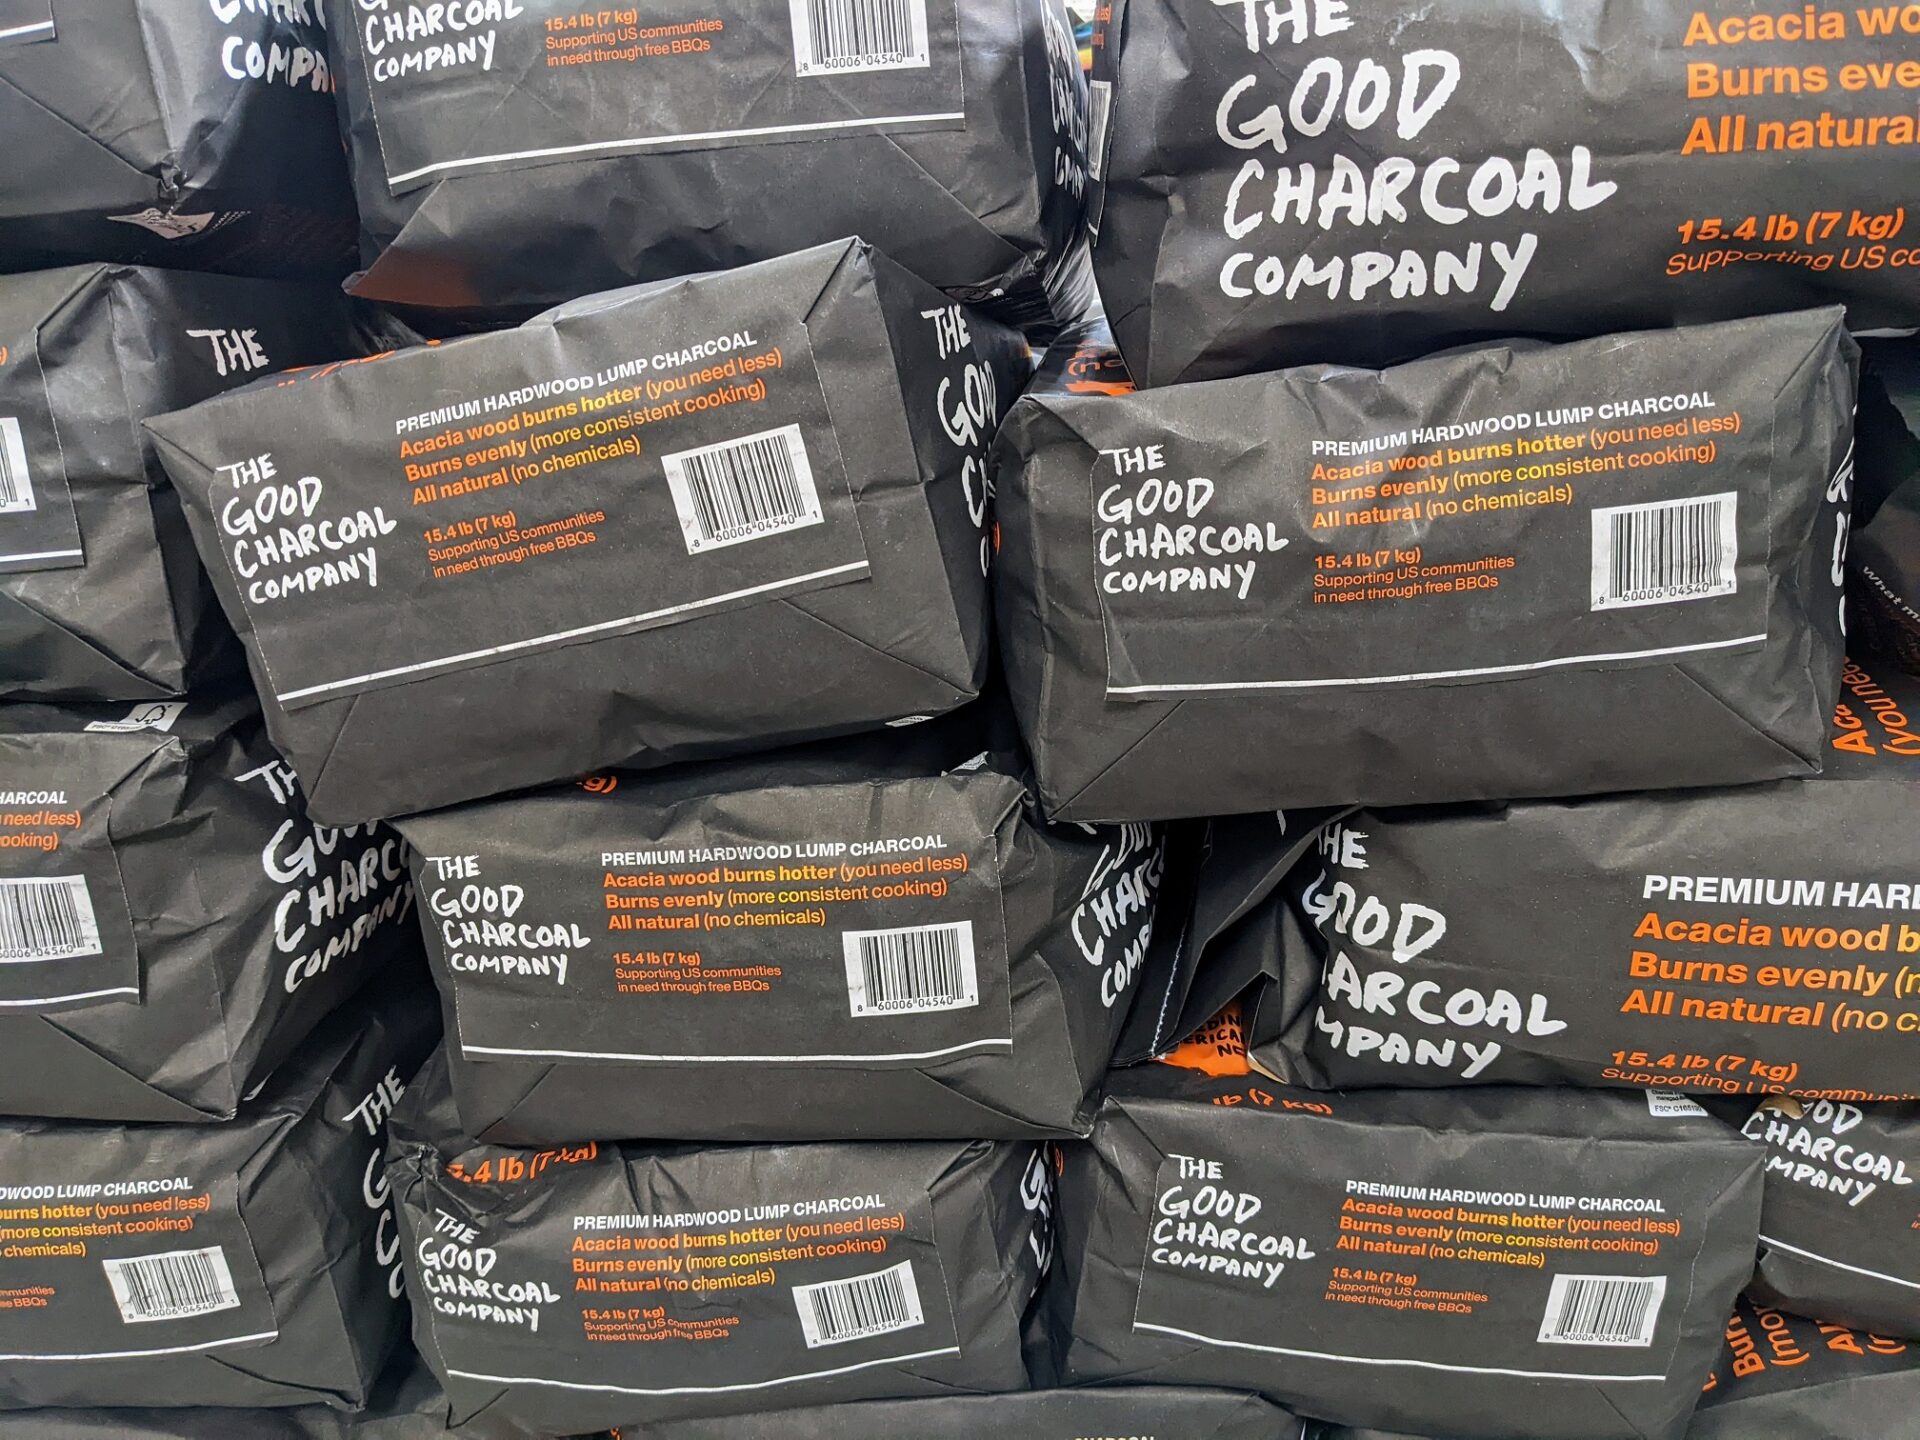 Bags of The Good Charcoal Company Charcoal